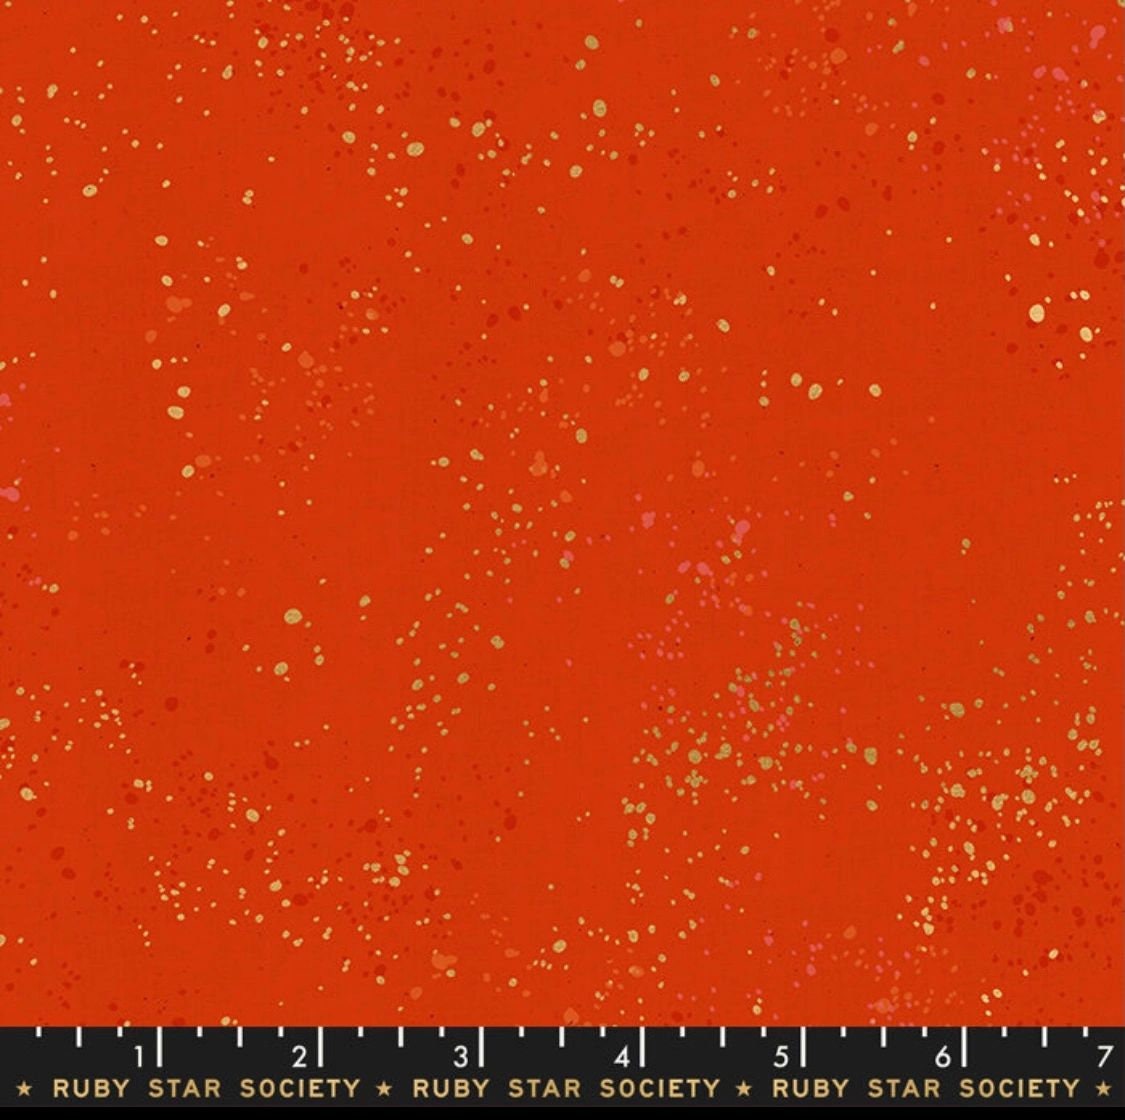 Speckled Metallic Warm Red - Ruby Star Society - 100% Cotton